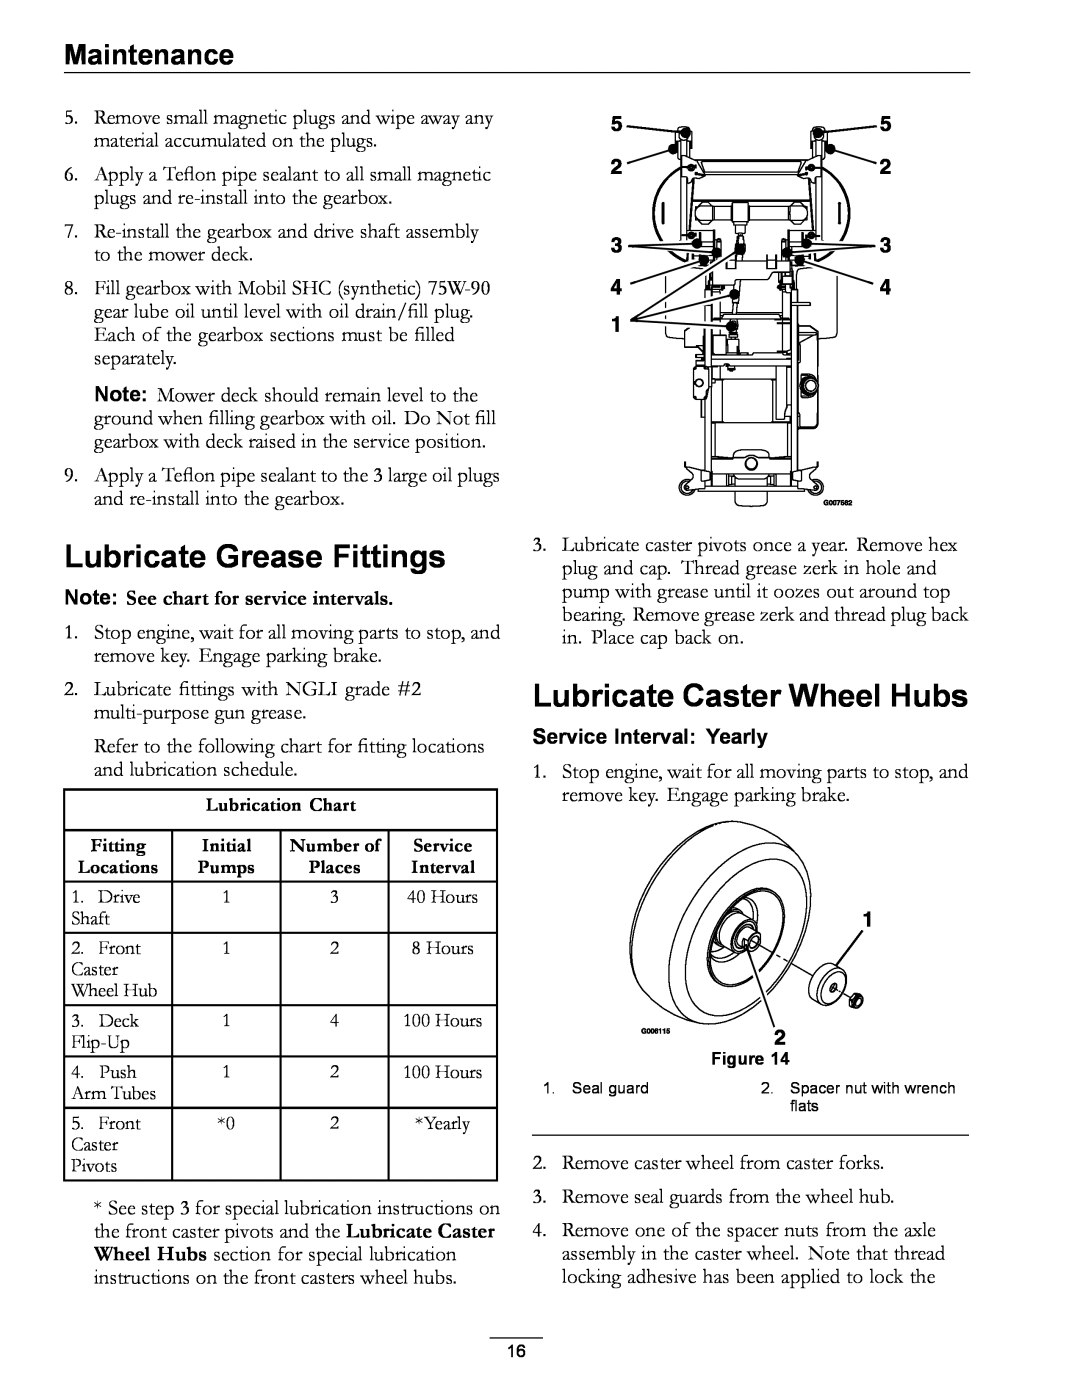 Exmark 4500-370 Lubricate Grease Fittings, Lubricate Caster Wheel Hubs, Note See chart for service intervals, Maintenance 